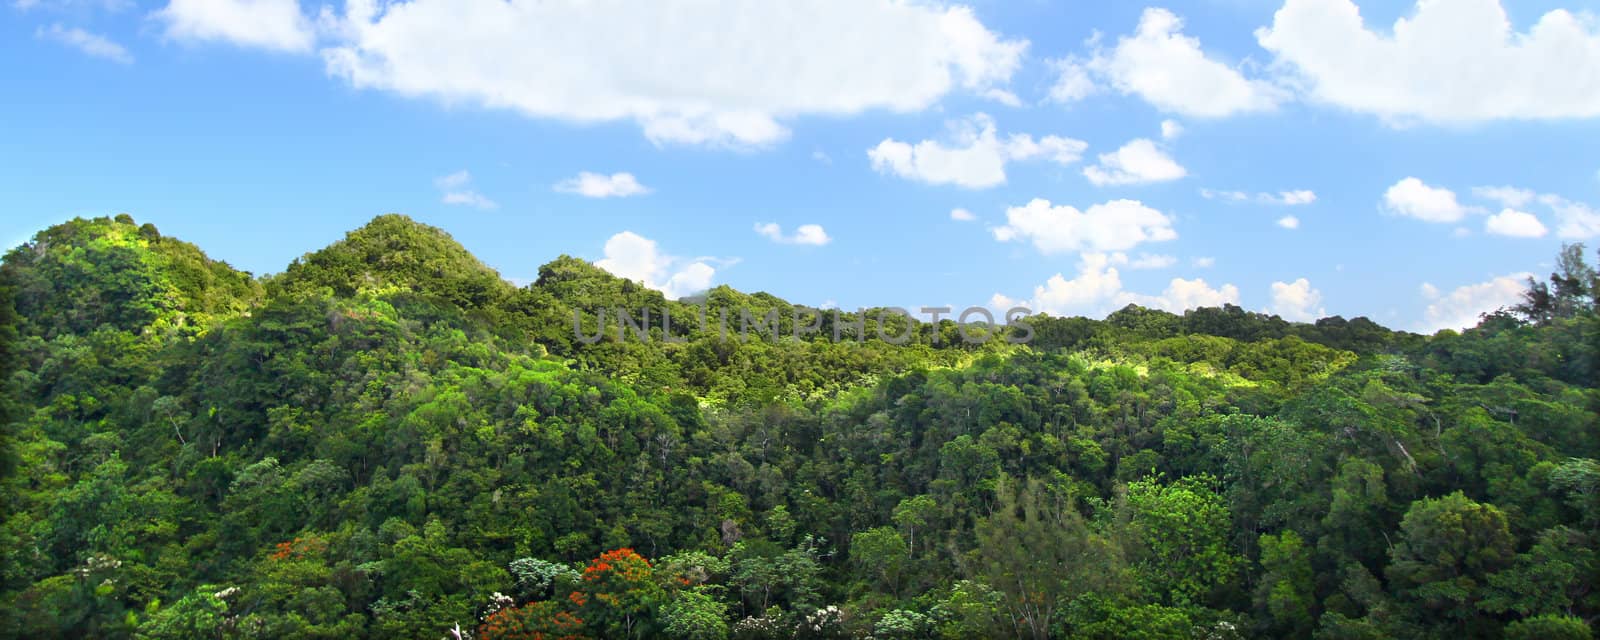 Guajataca Forest Reserve - Puerto Rico by Wirepec